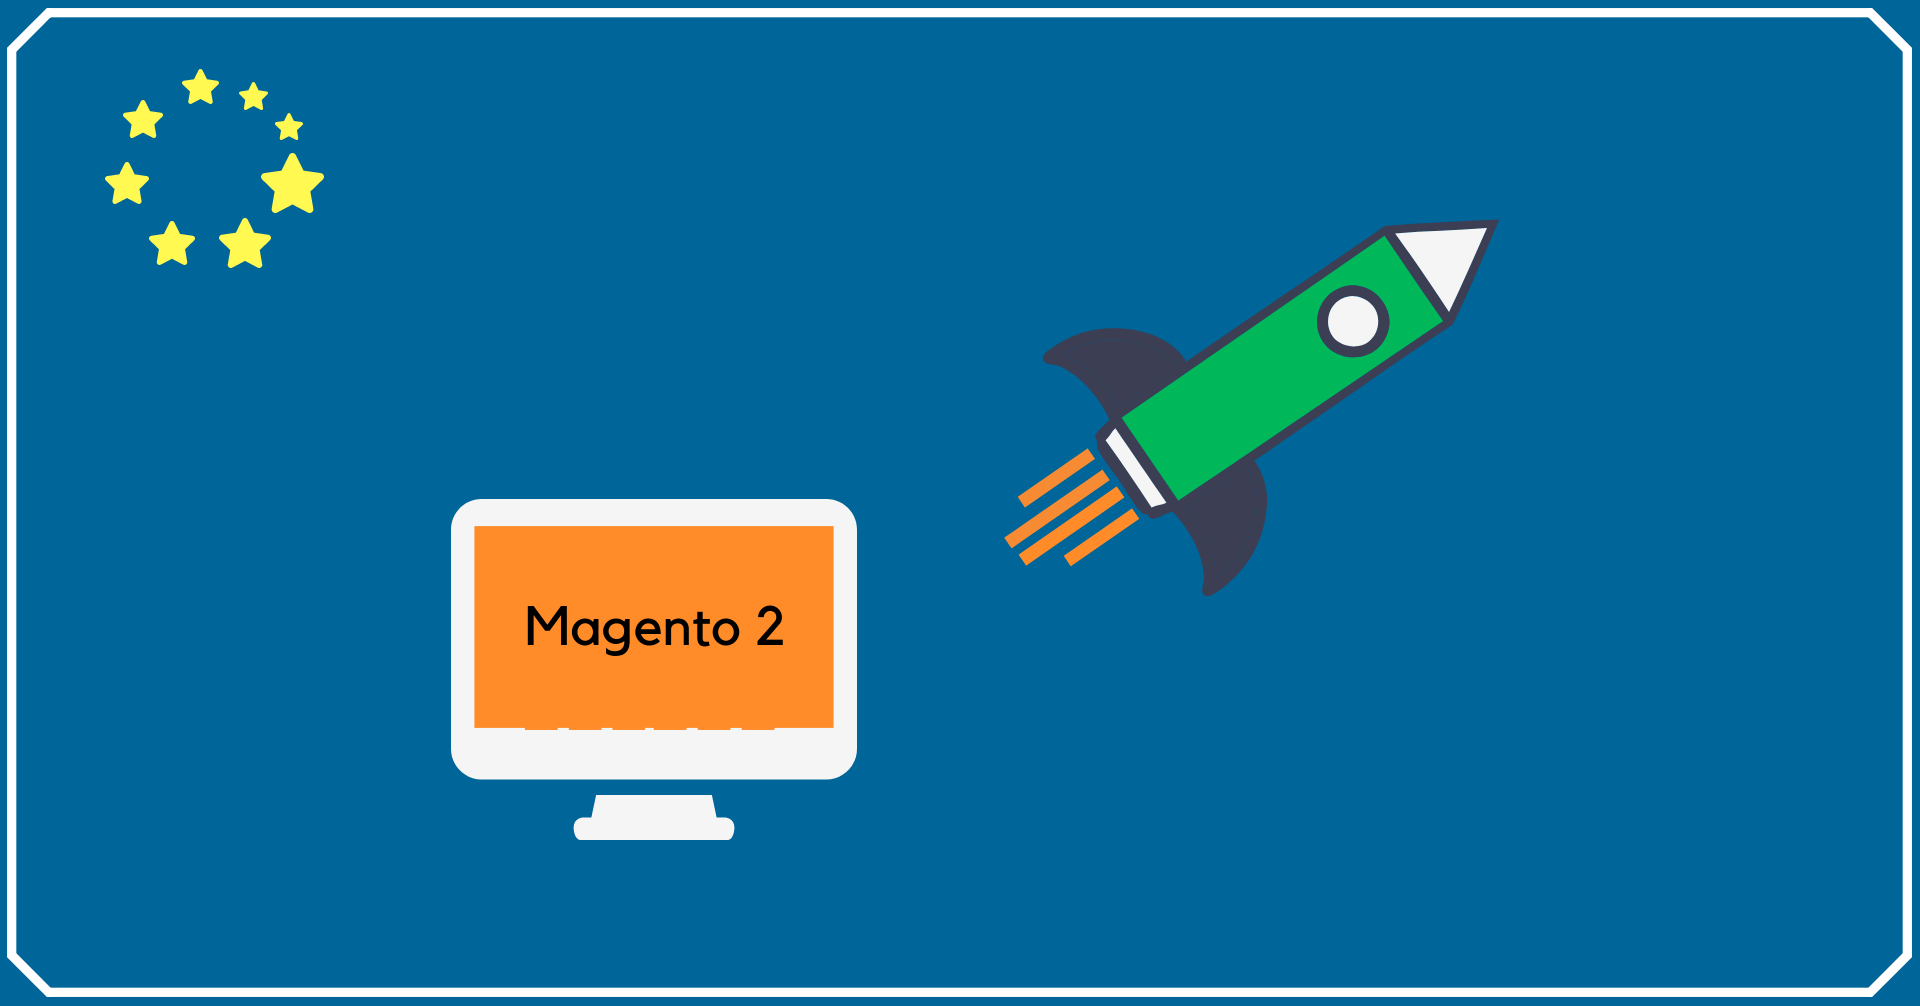 How to speed up Magento 2 website?